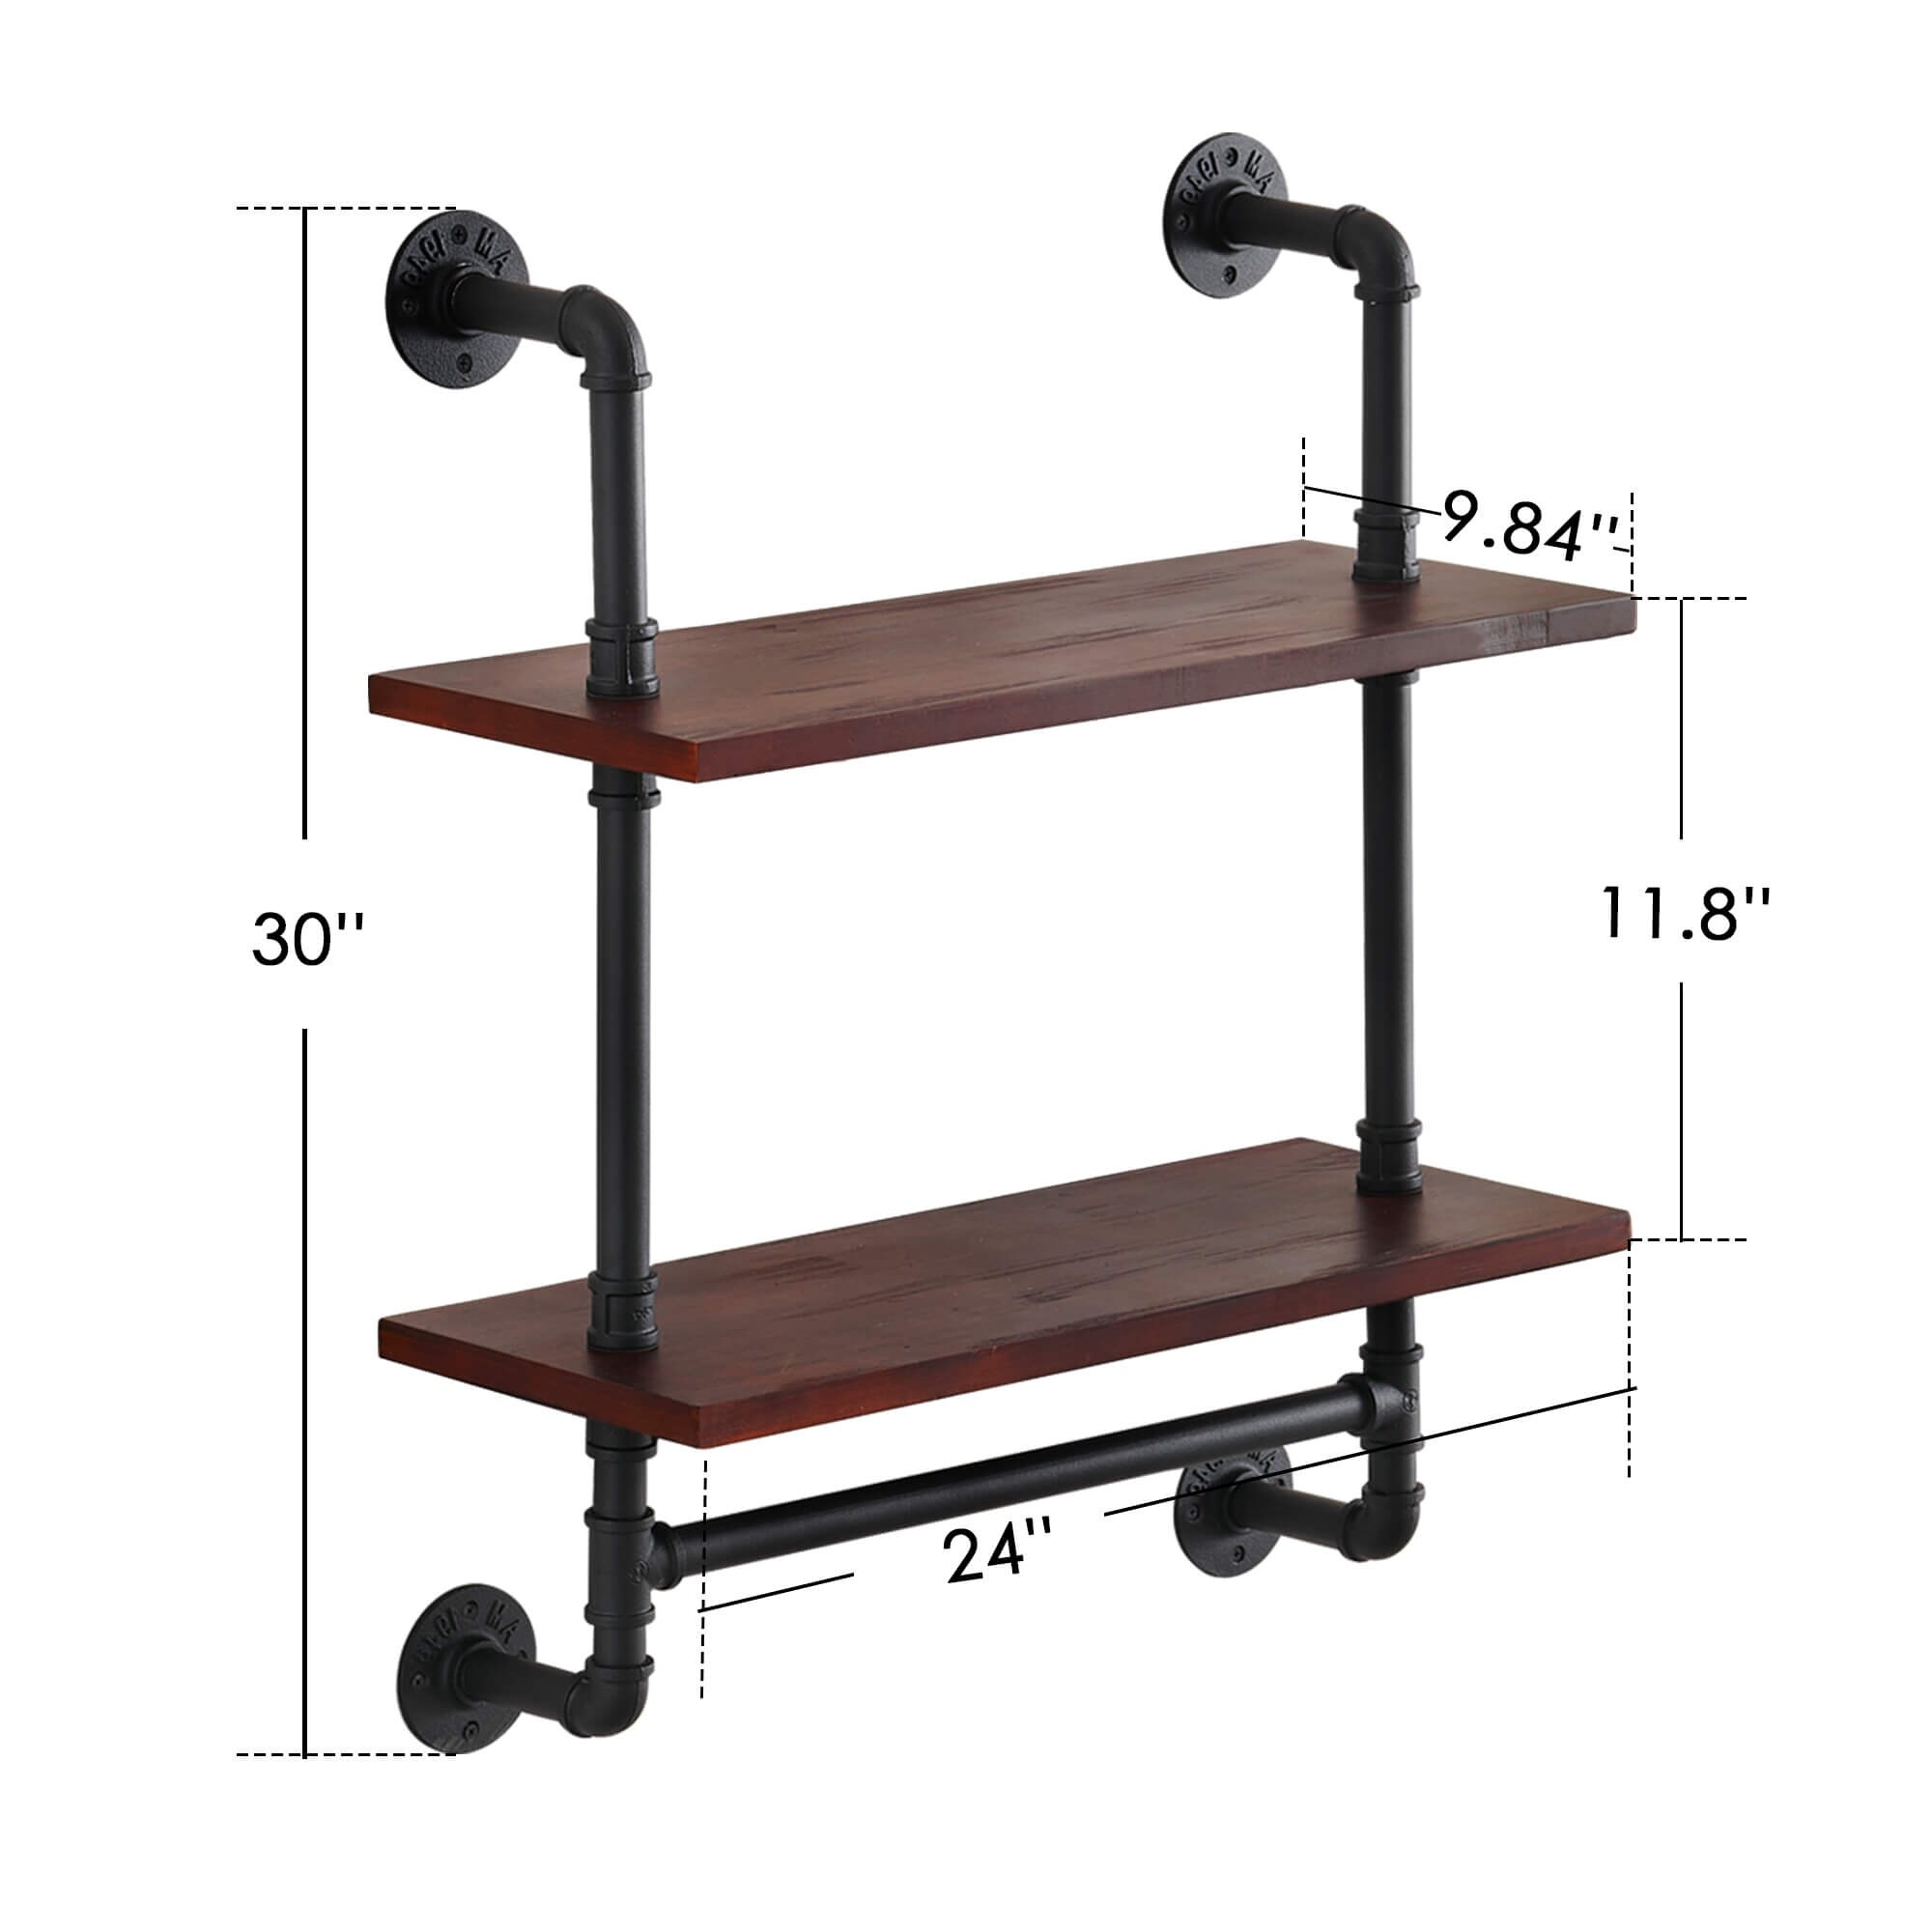 https://ak1.ostkcdn.com/images/products/is/images/direct/8f89e1890e5c20ea77ebd5a2fd9a1c3657e55f95/Industrial-Pipe-Shelving%2C-1-Tier-Iron-Pipe-Shelves-Industrial-Bathroom-Shelves-with-Towel-bar.jpg